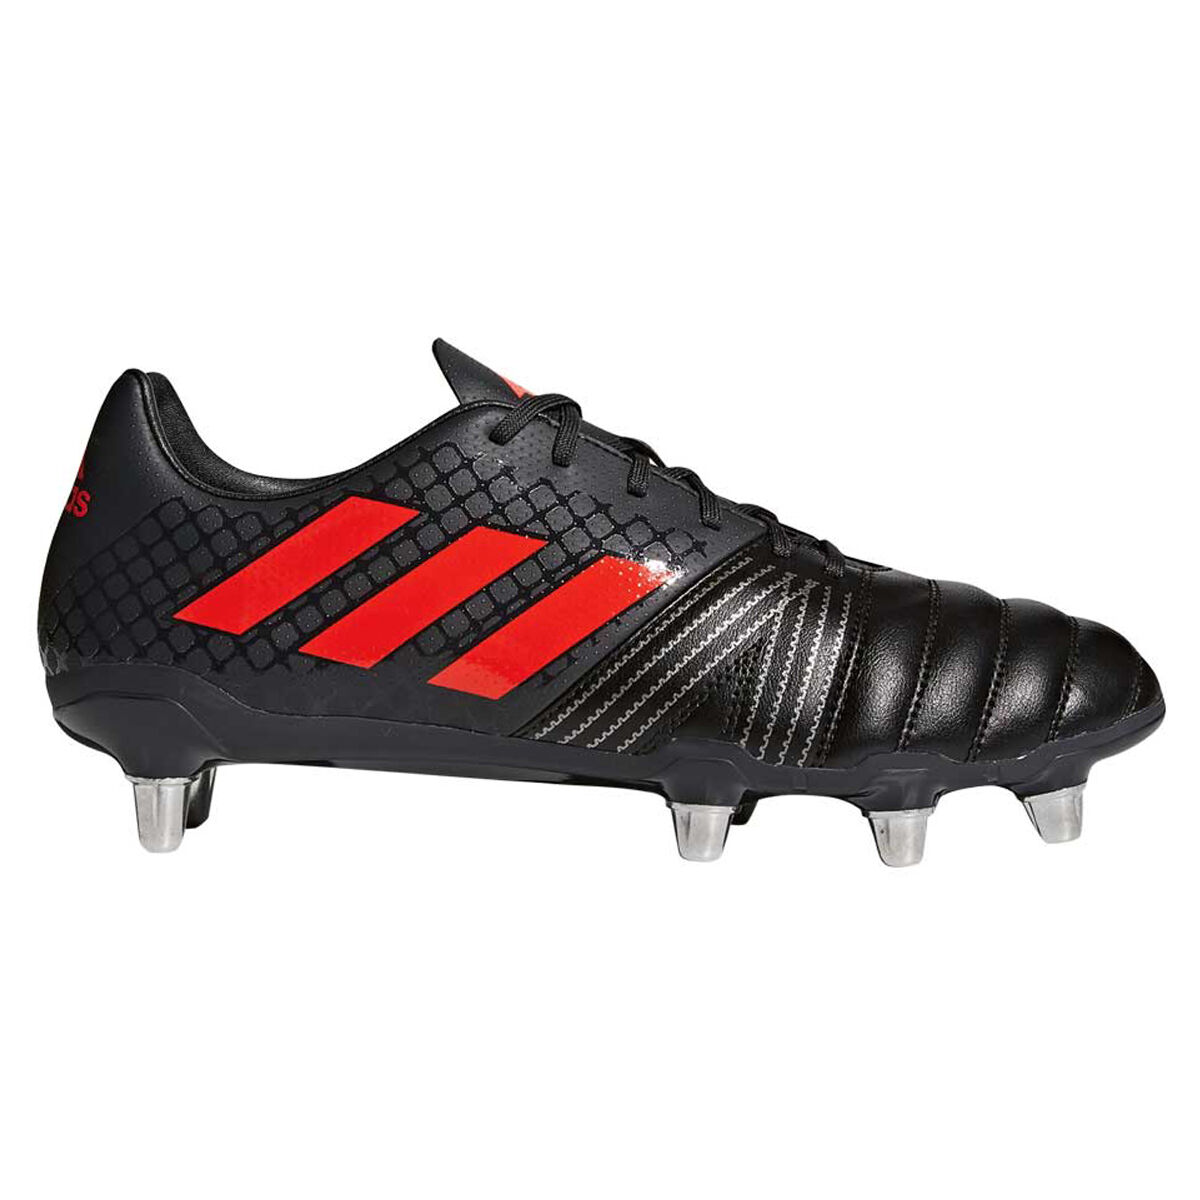 adidas kakari rugby boots size 11